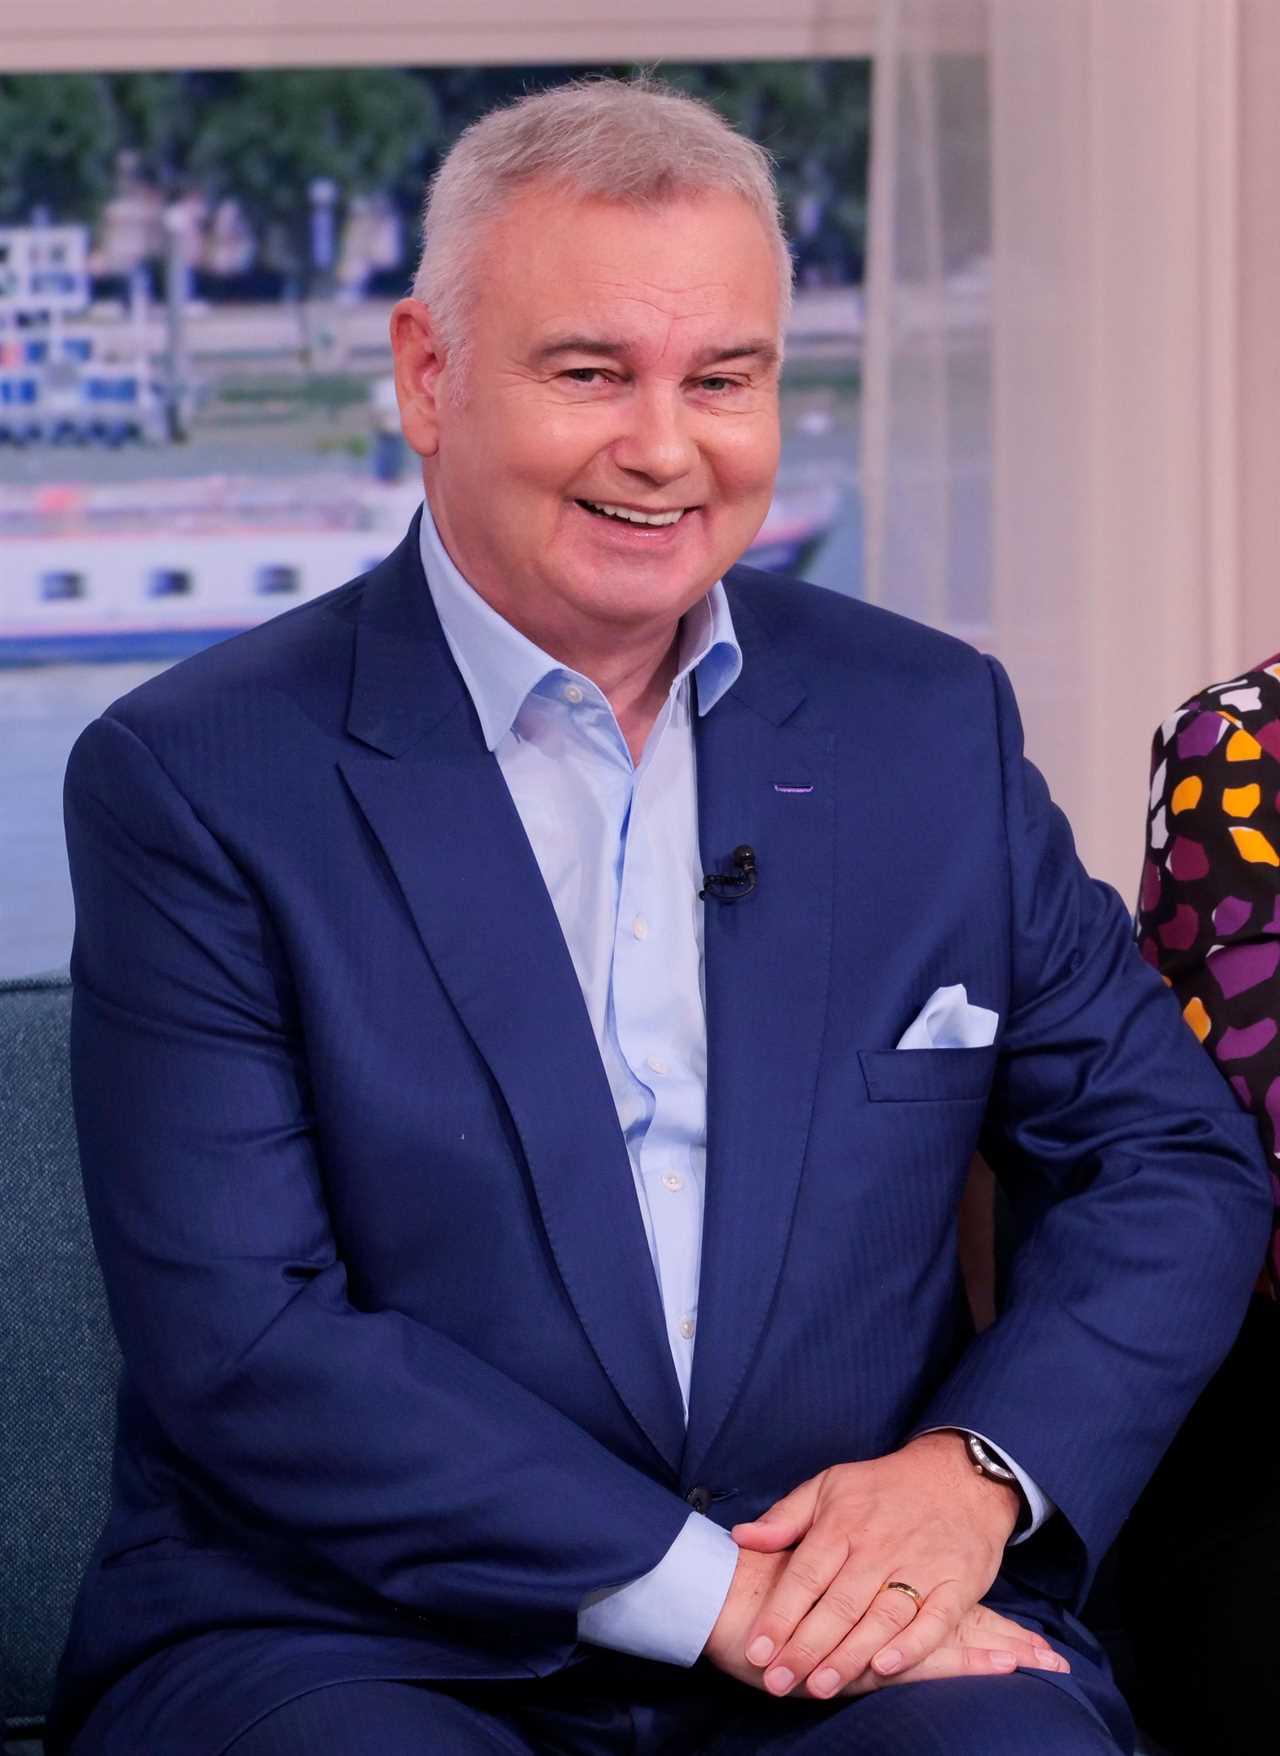 Eamonn Holmes slams Phillip Schofield saying ‘he’s lied to everyone’ and ‘more will come out’